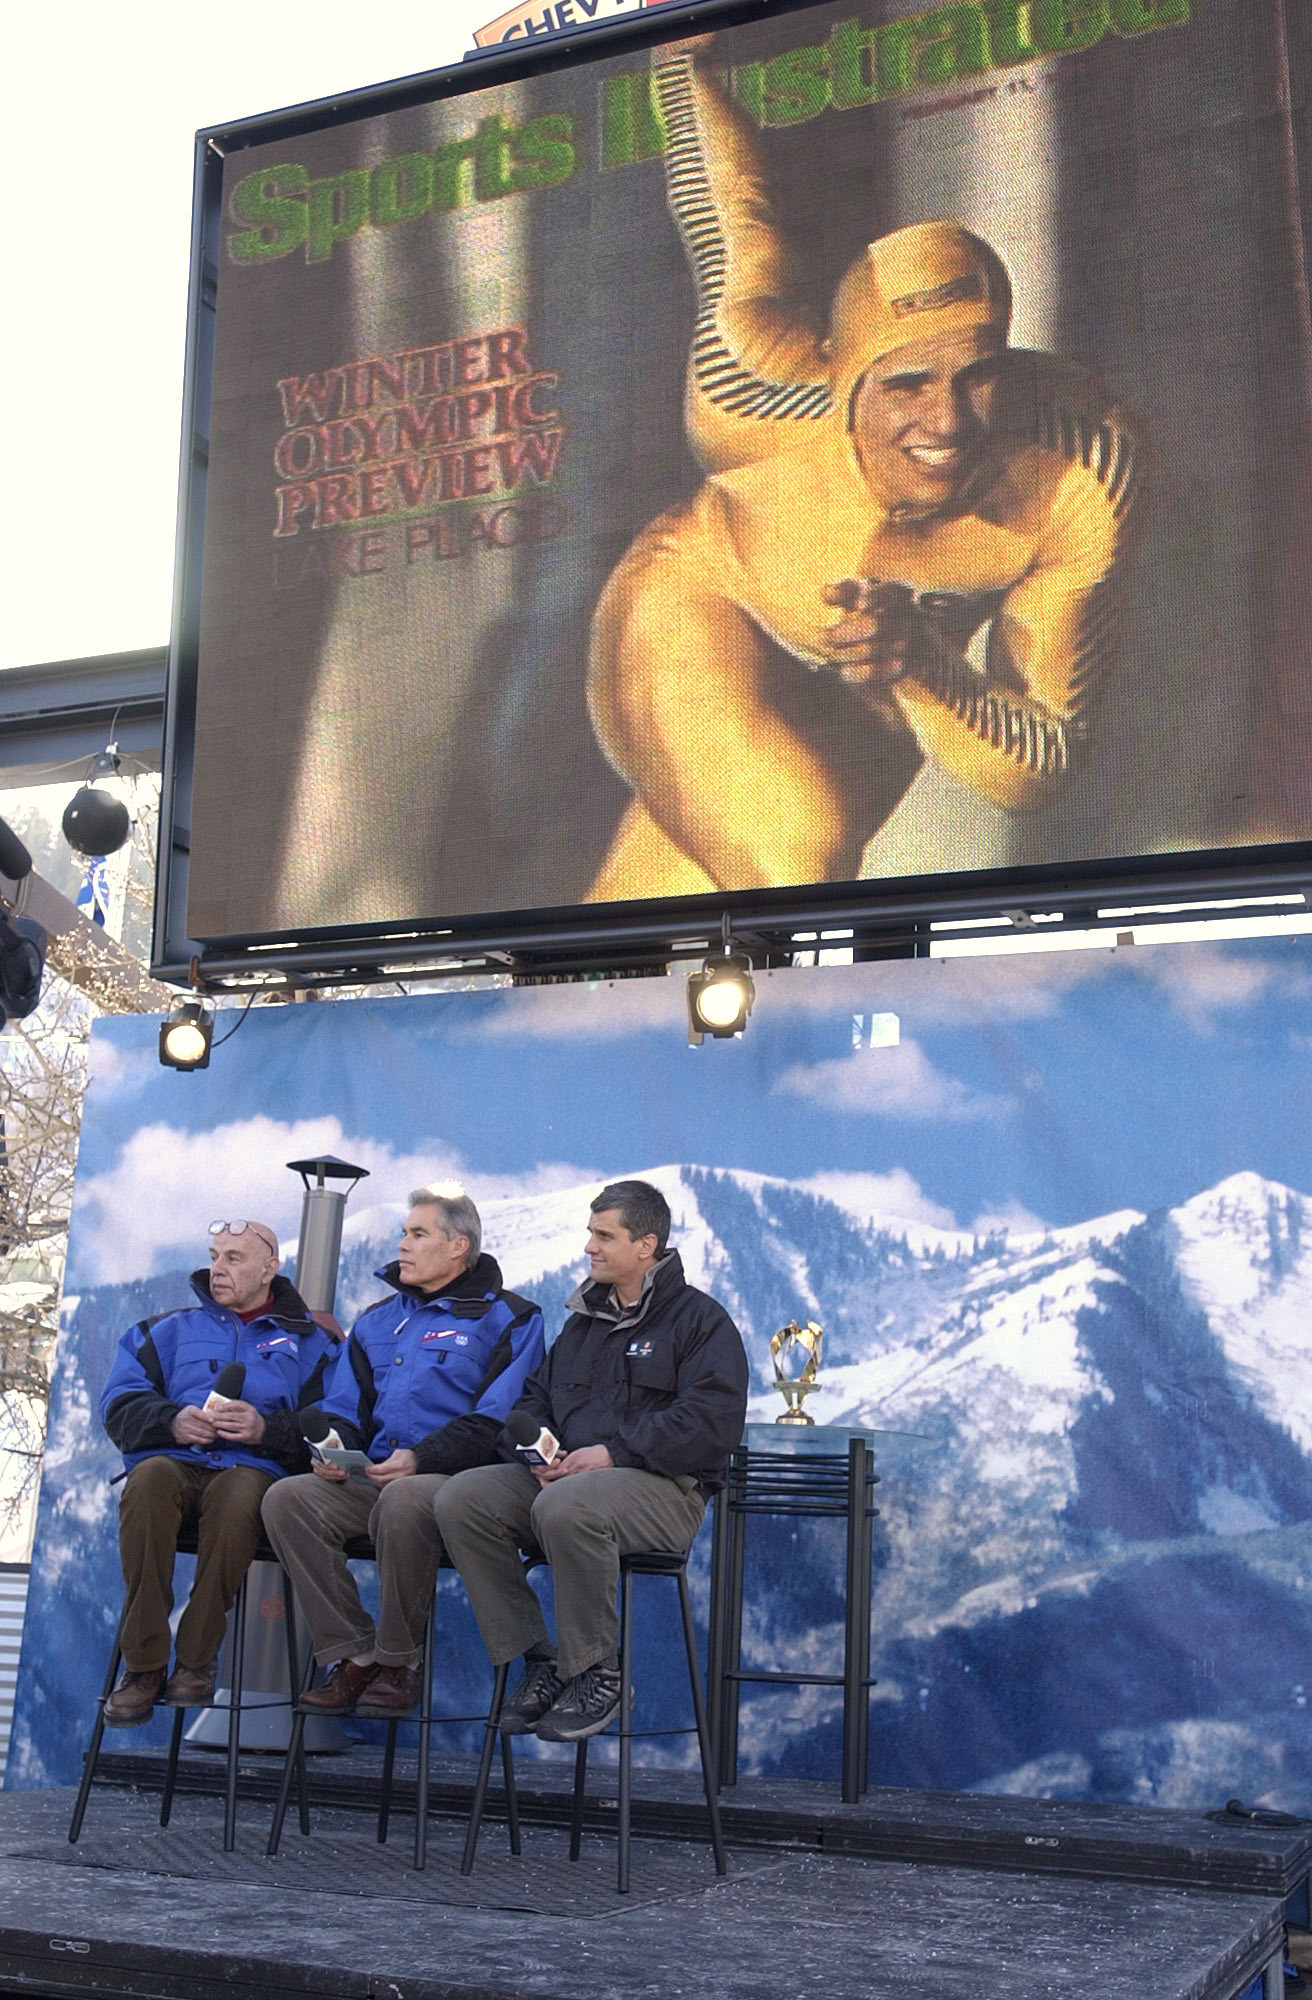 Heiden, right, was honoured at the Salt Lake City 2002 Games by film-maker Bud Greenspan, left, as one of the 10 greatest Winter Olympians of all time ©Getty Images